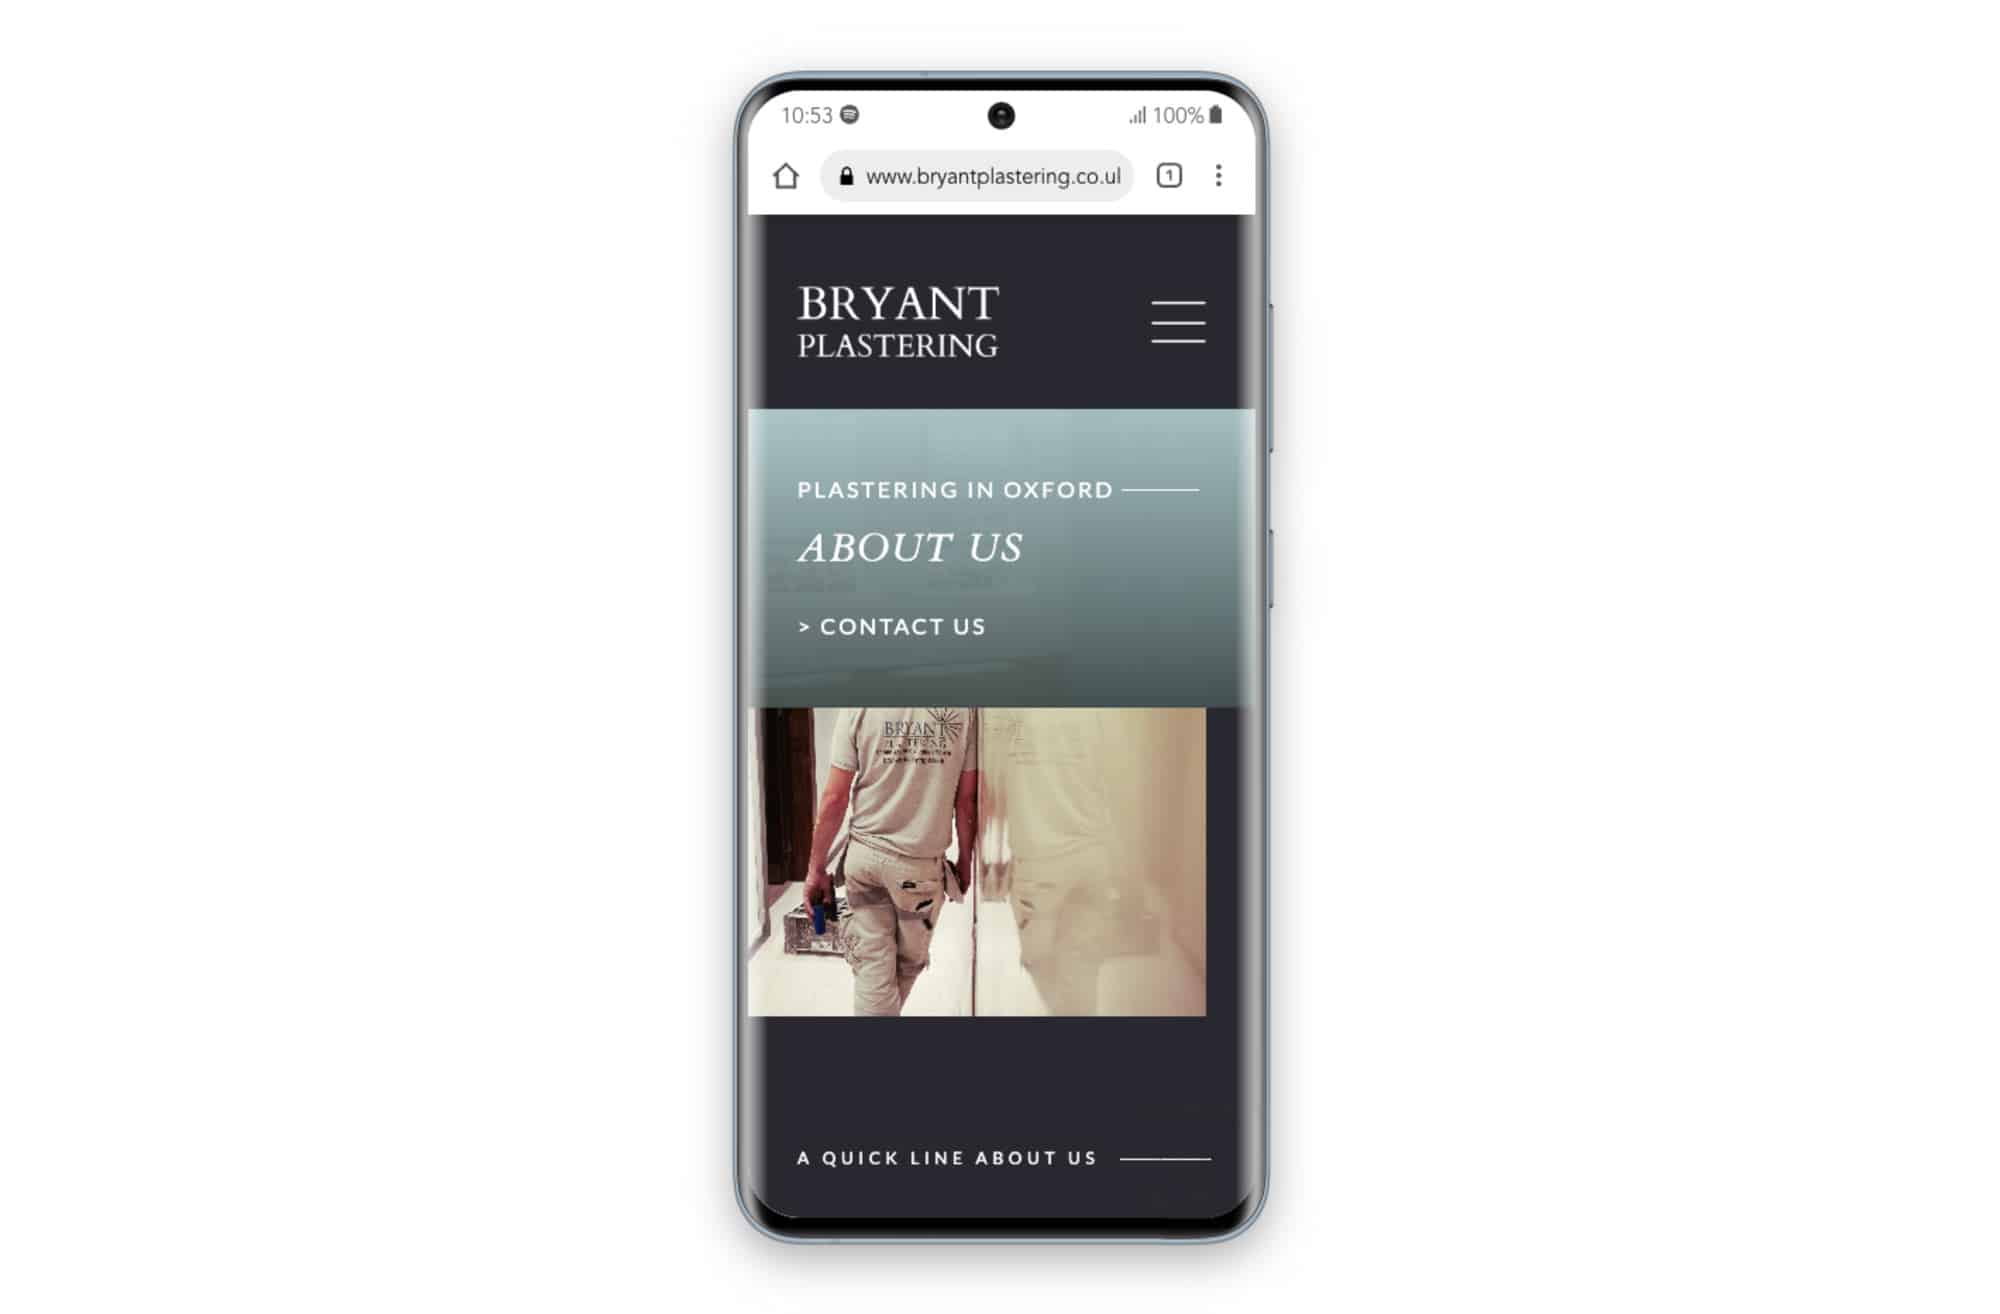 The Bryant Plastering website displayed on a Samsung smartphone